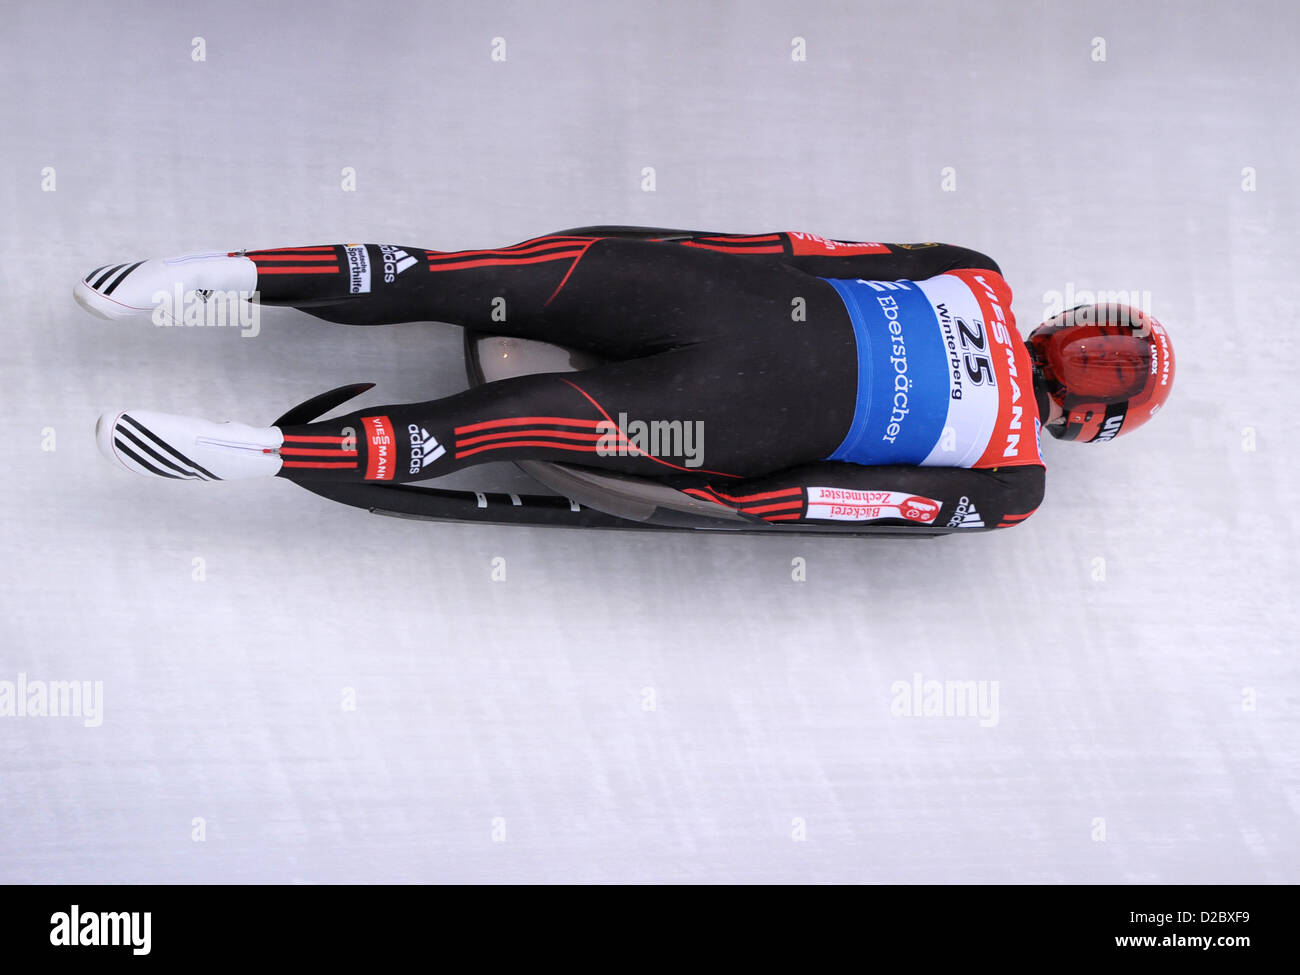 19.01.2013. Winterberg, Germany.  Julian (Ger) in action during the Luge World Cup in Winterberg, Germany Stock Photo